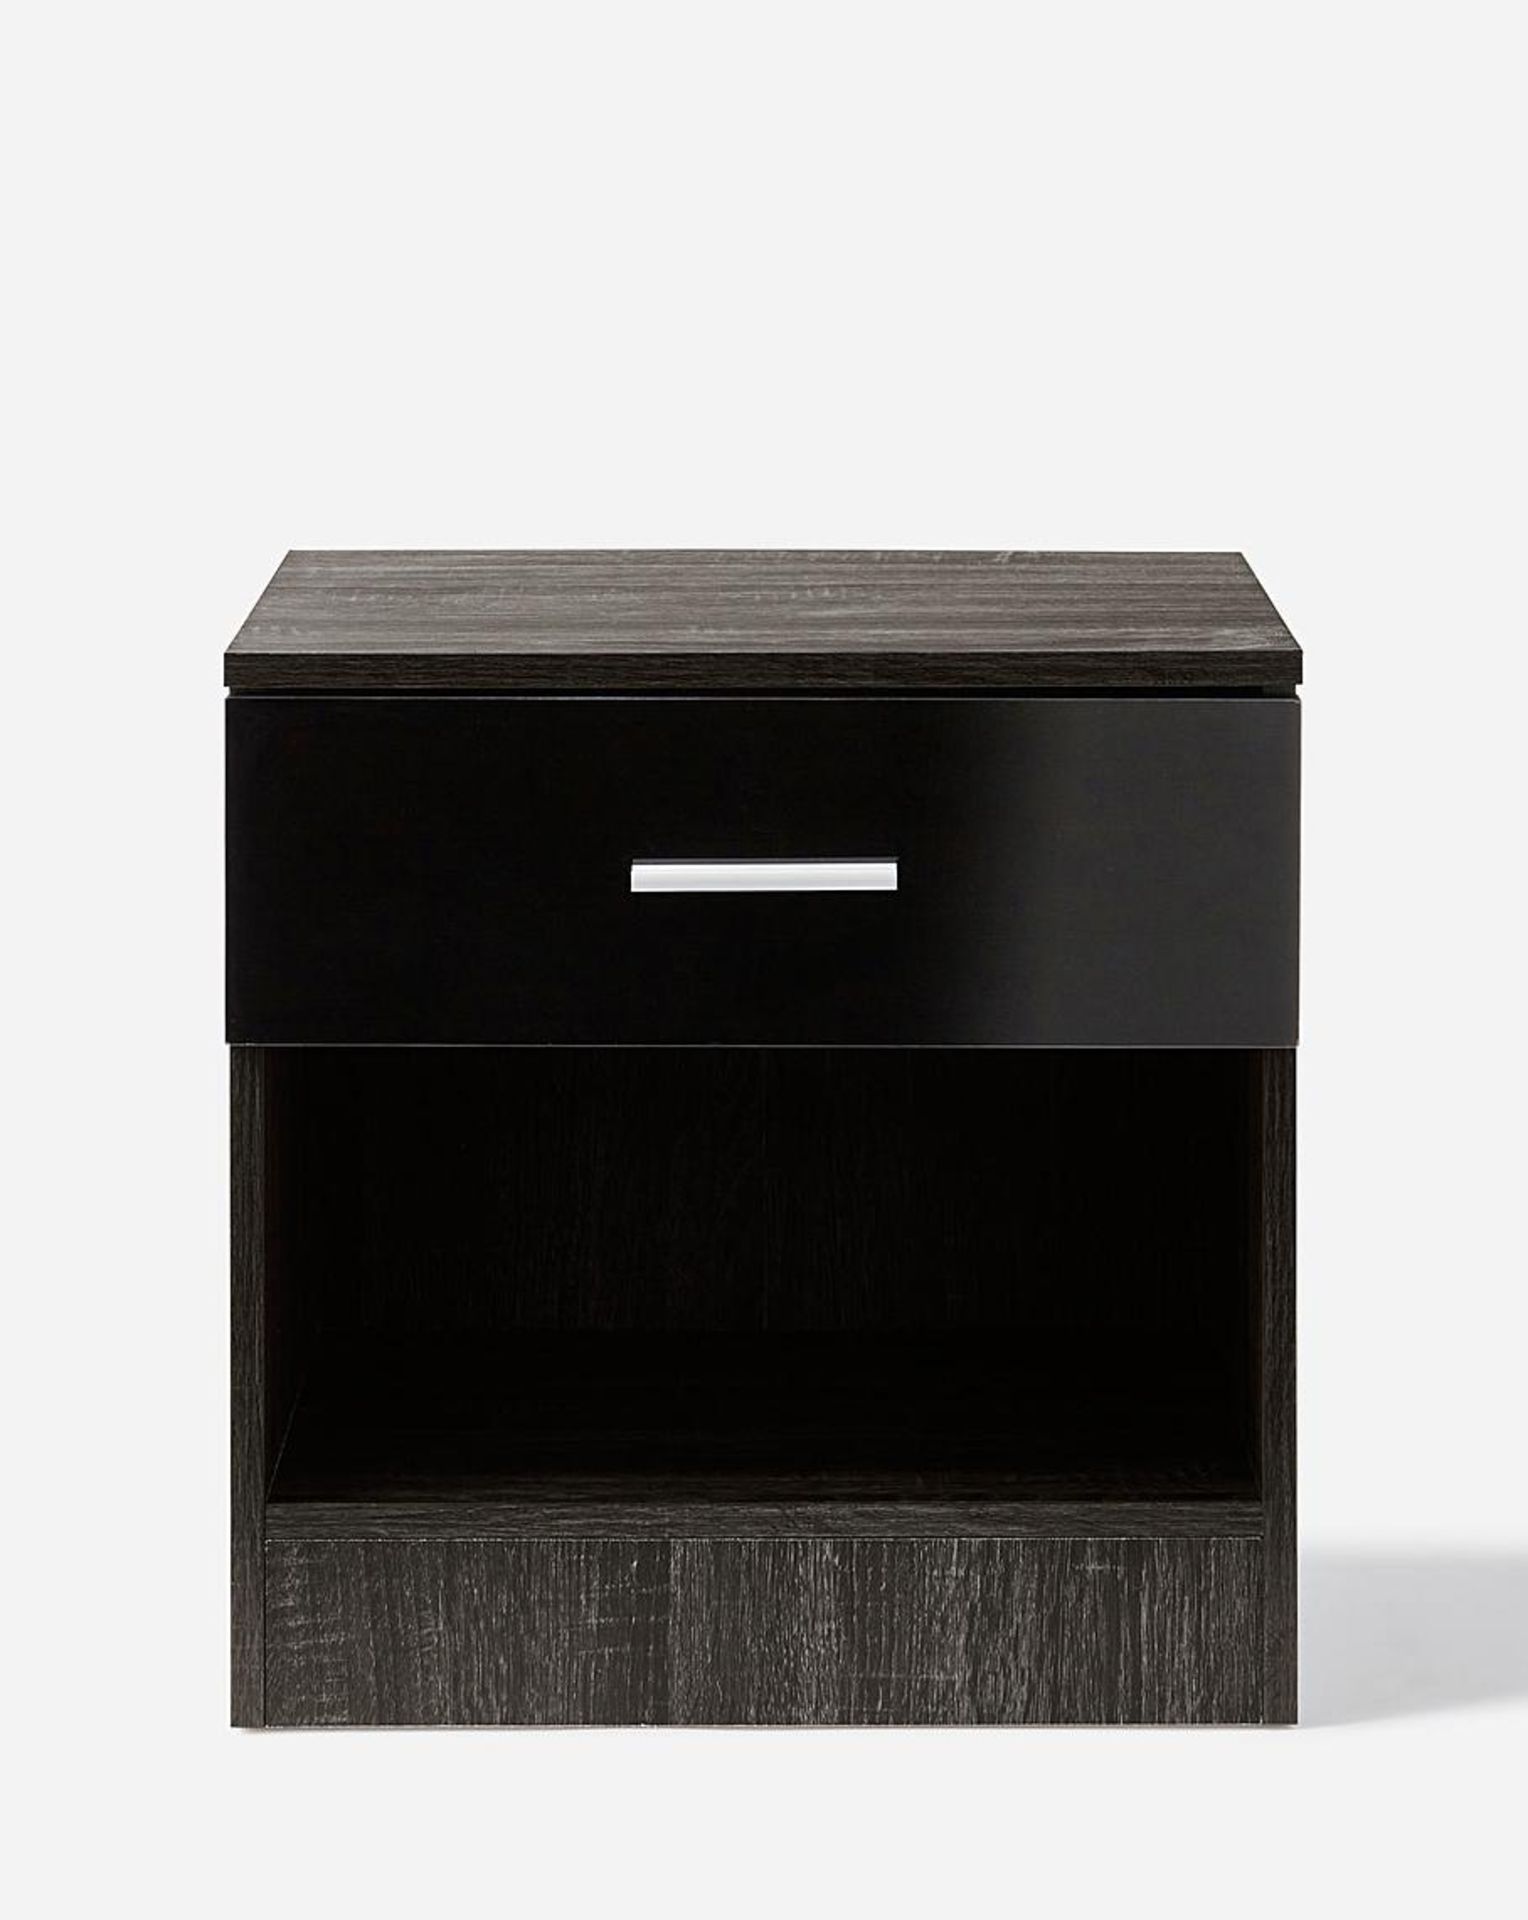 Miami Side Table. RRP £109.00. The Miami range is a stylish modern design wihich offers great value!